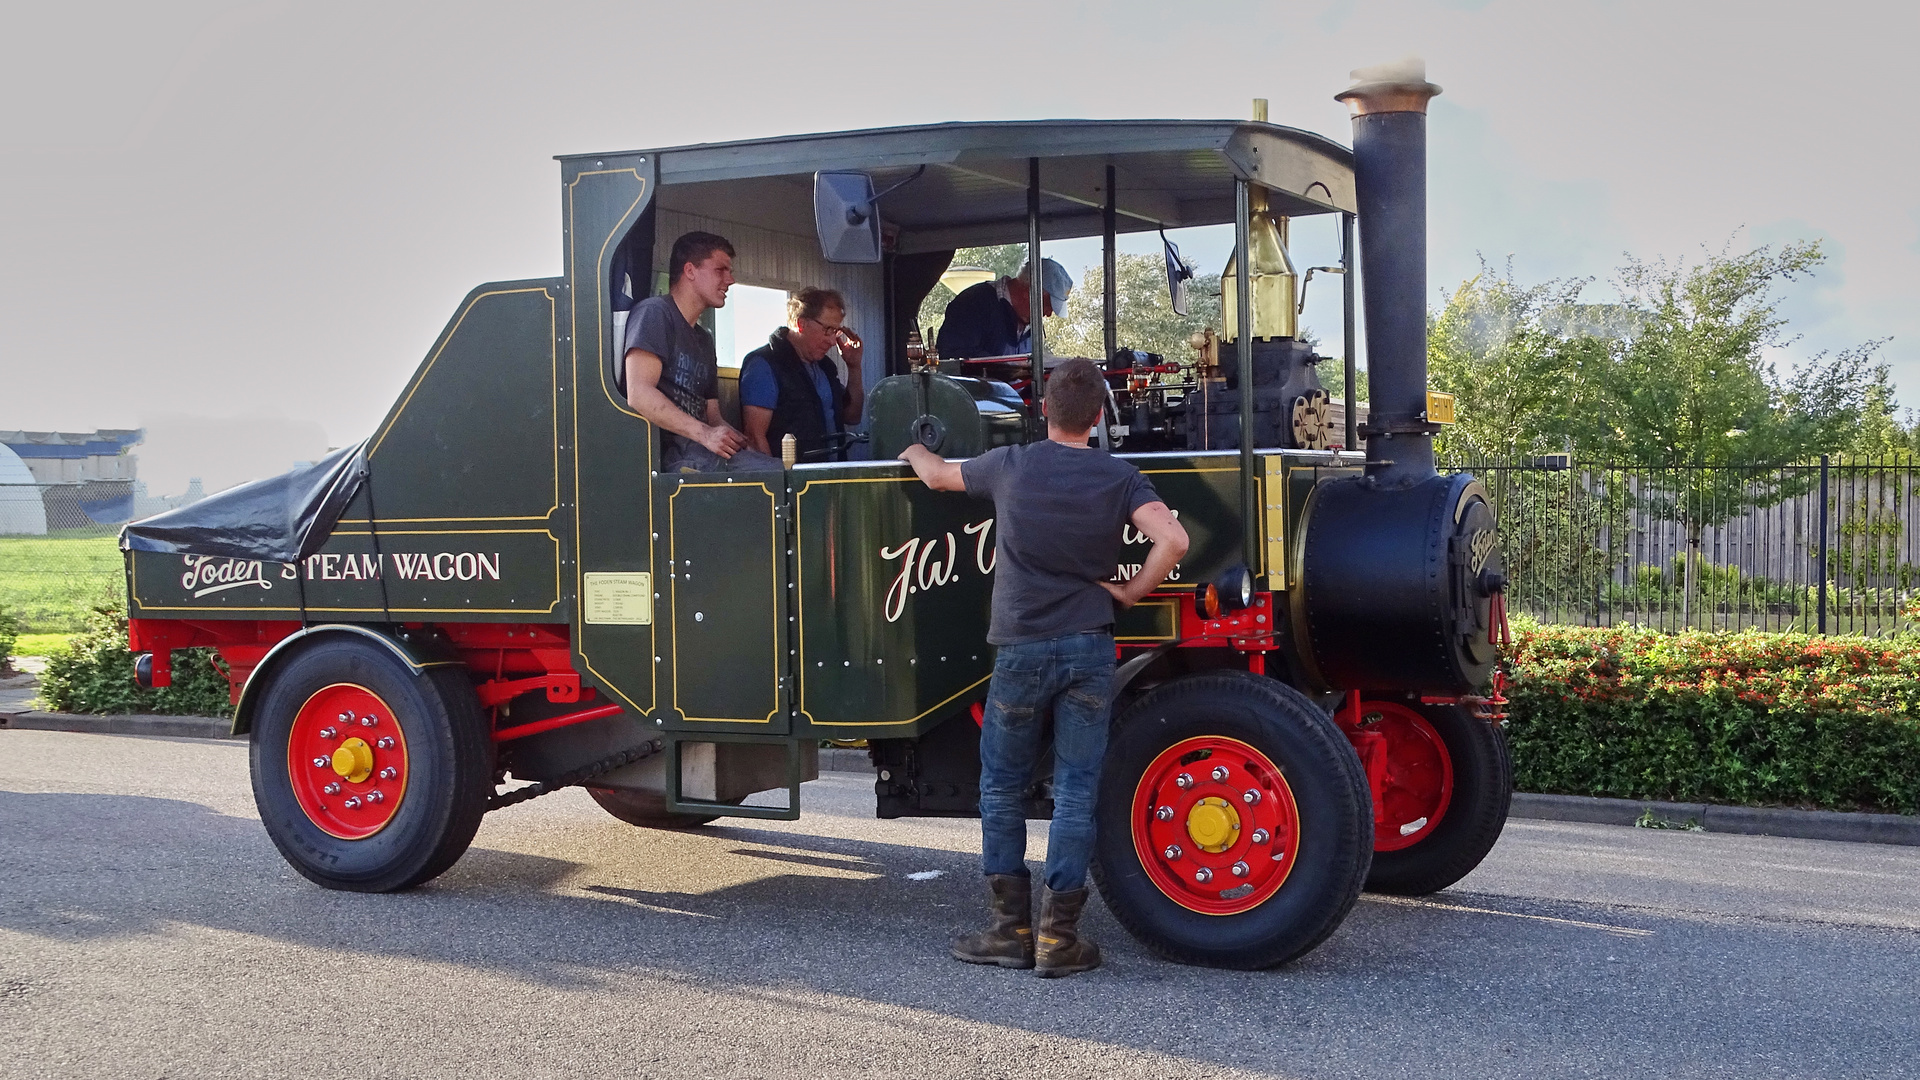 The Loden Steam Wagon